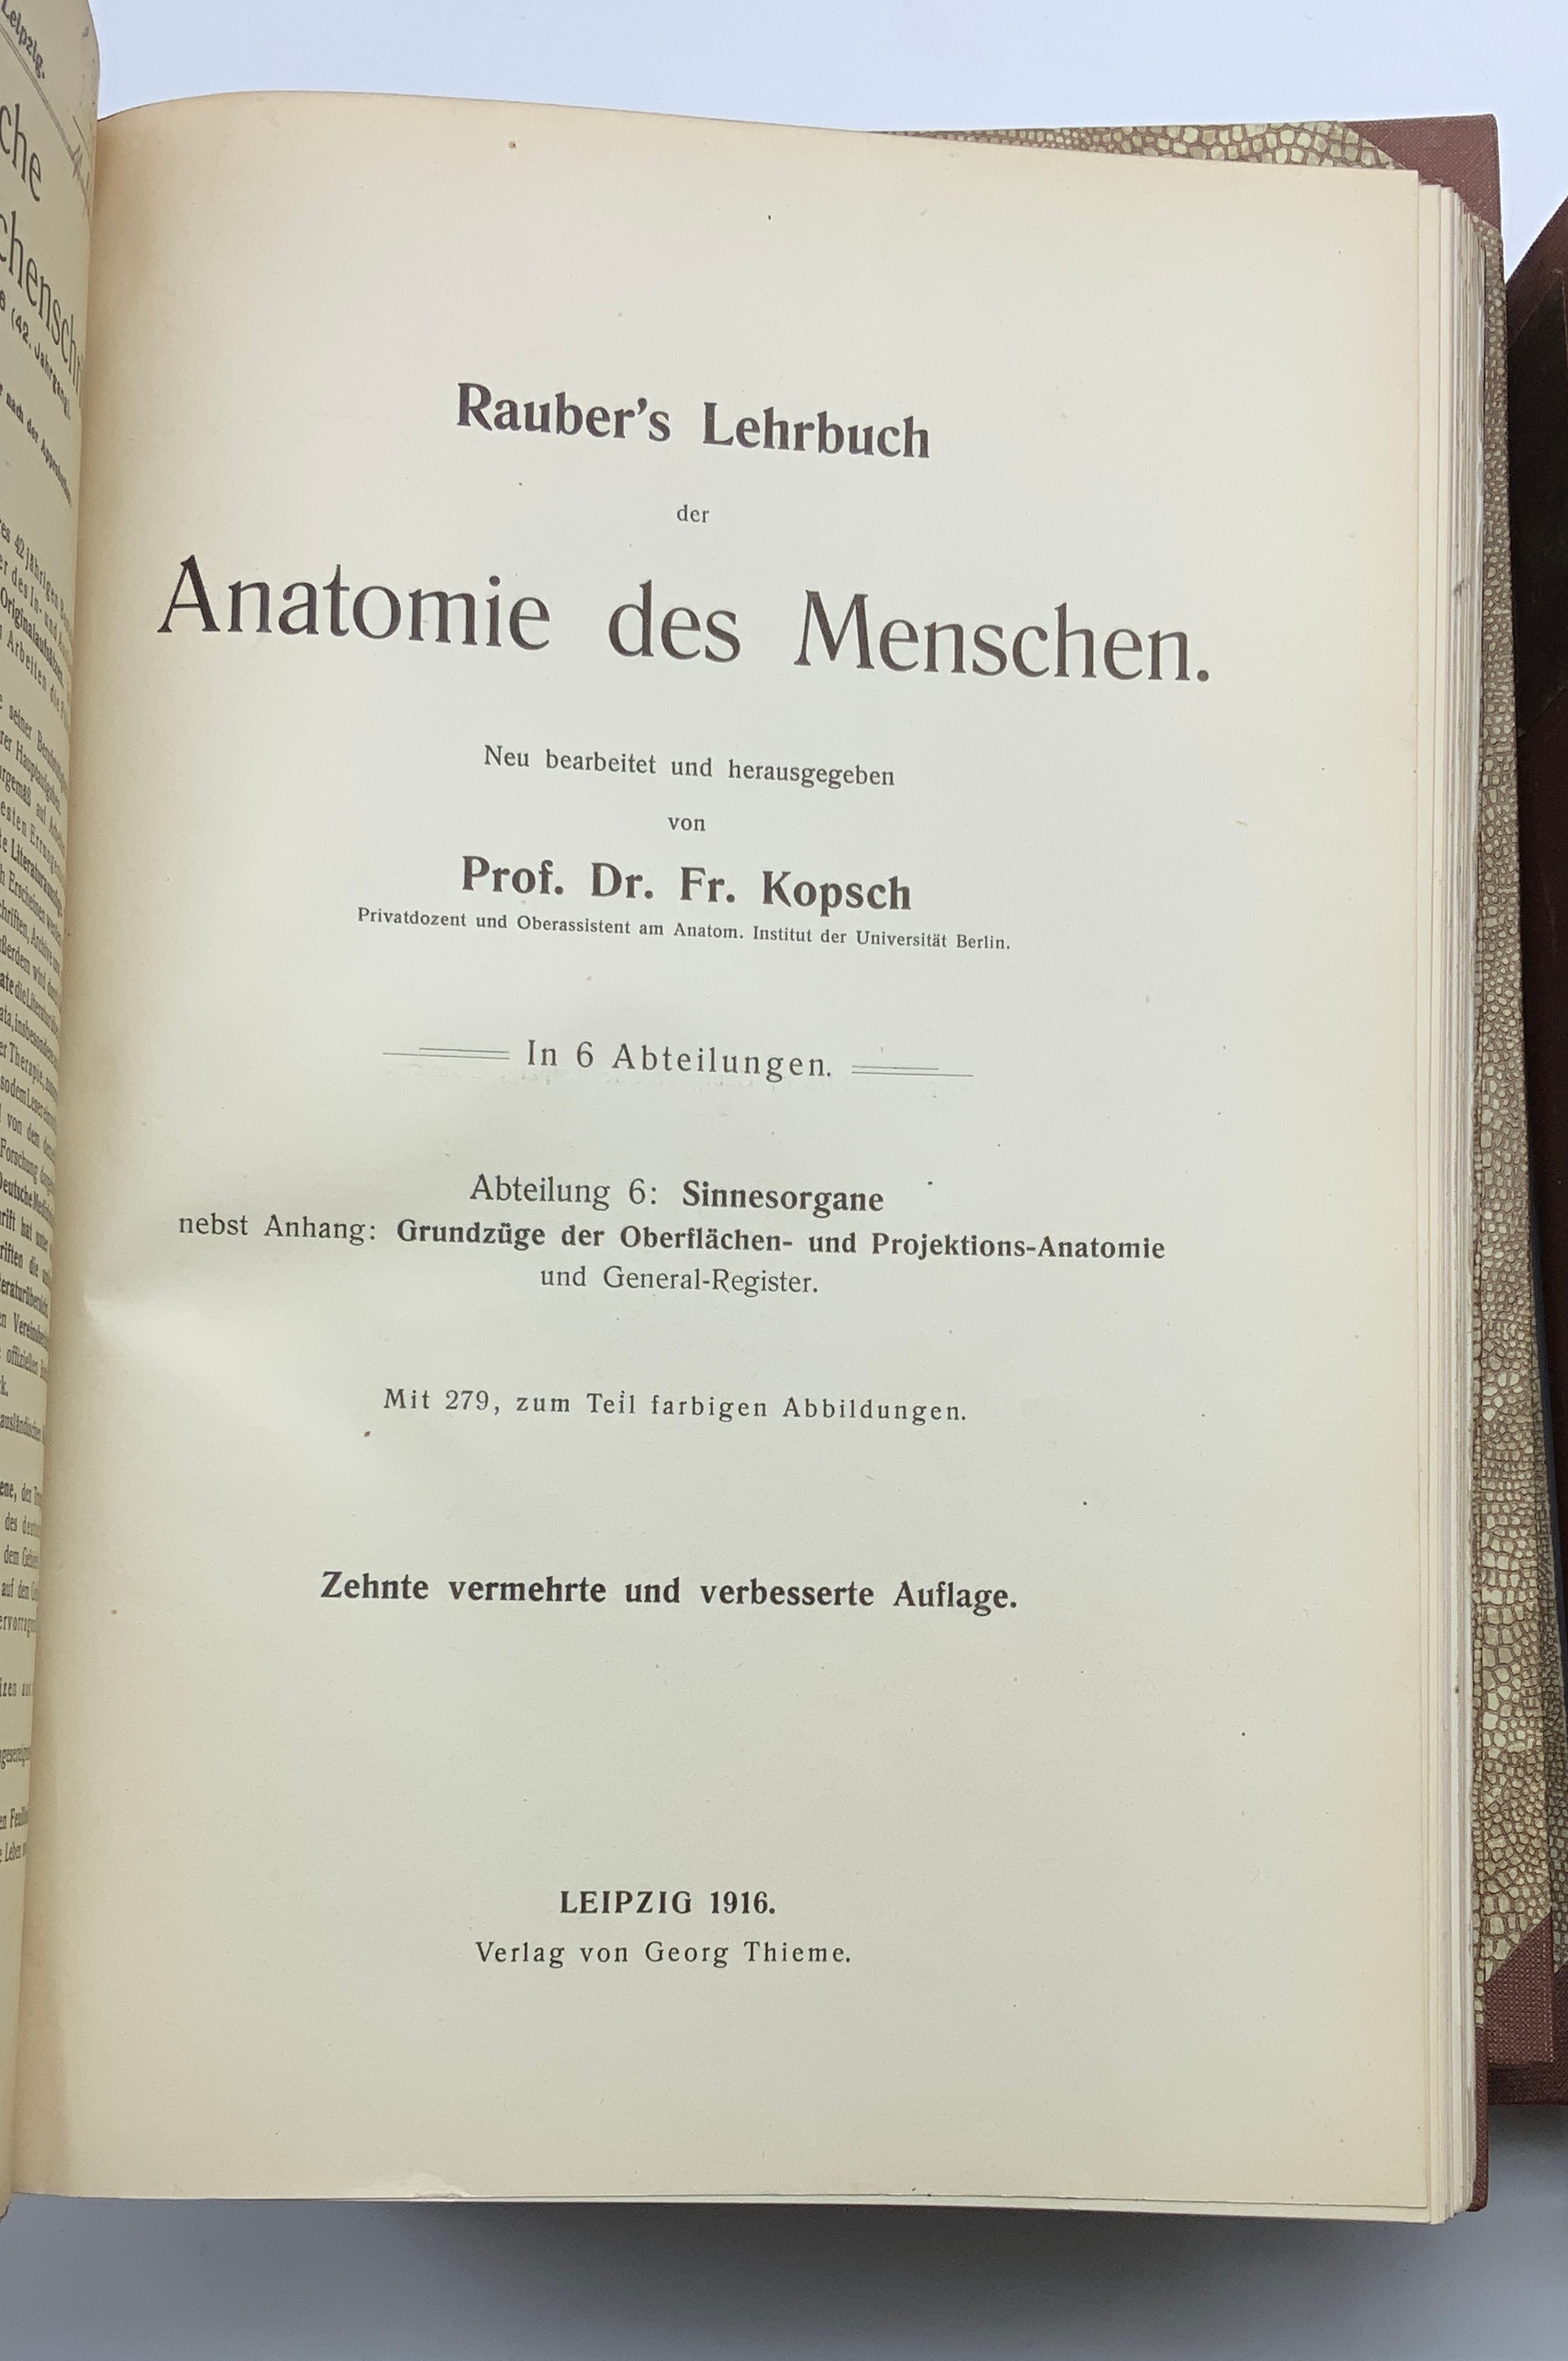 SET OF MEDICAL ANATOMY BOOKS (GERMAN) FROM the 1920s - Image 7 of 7